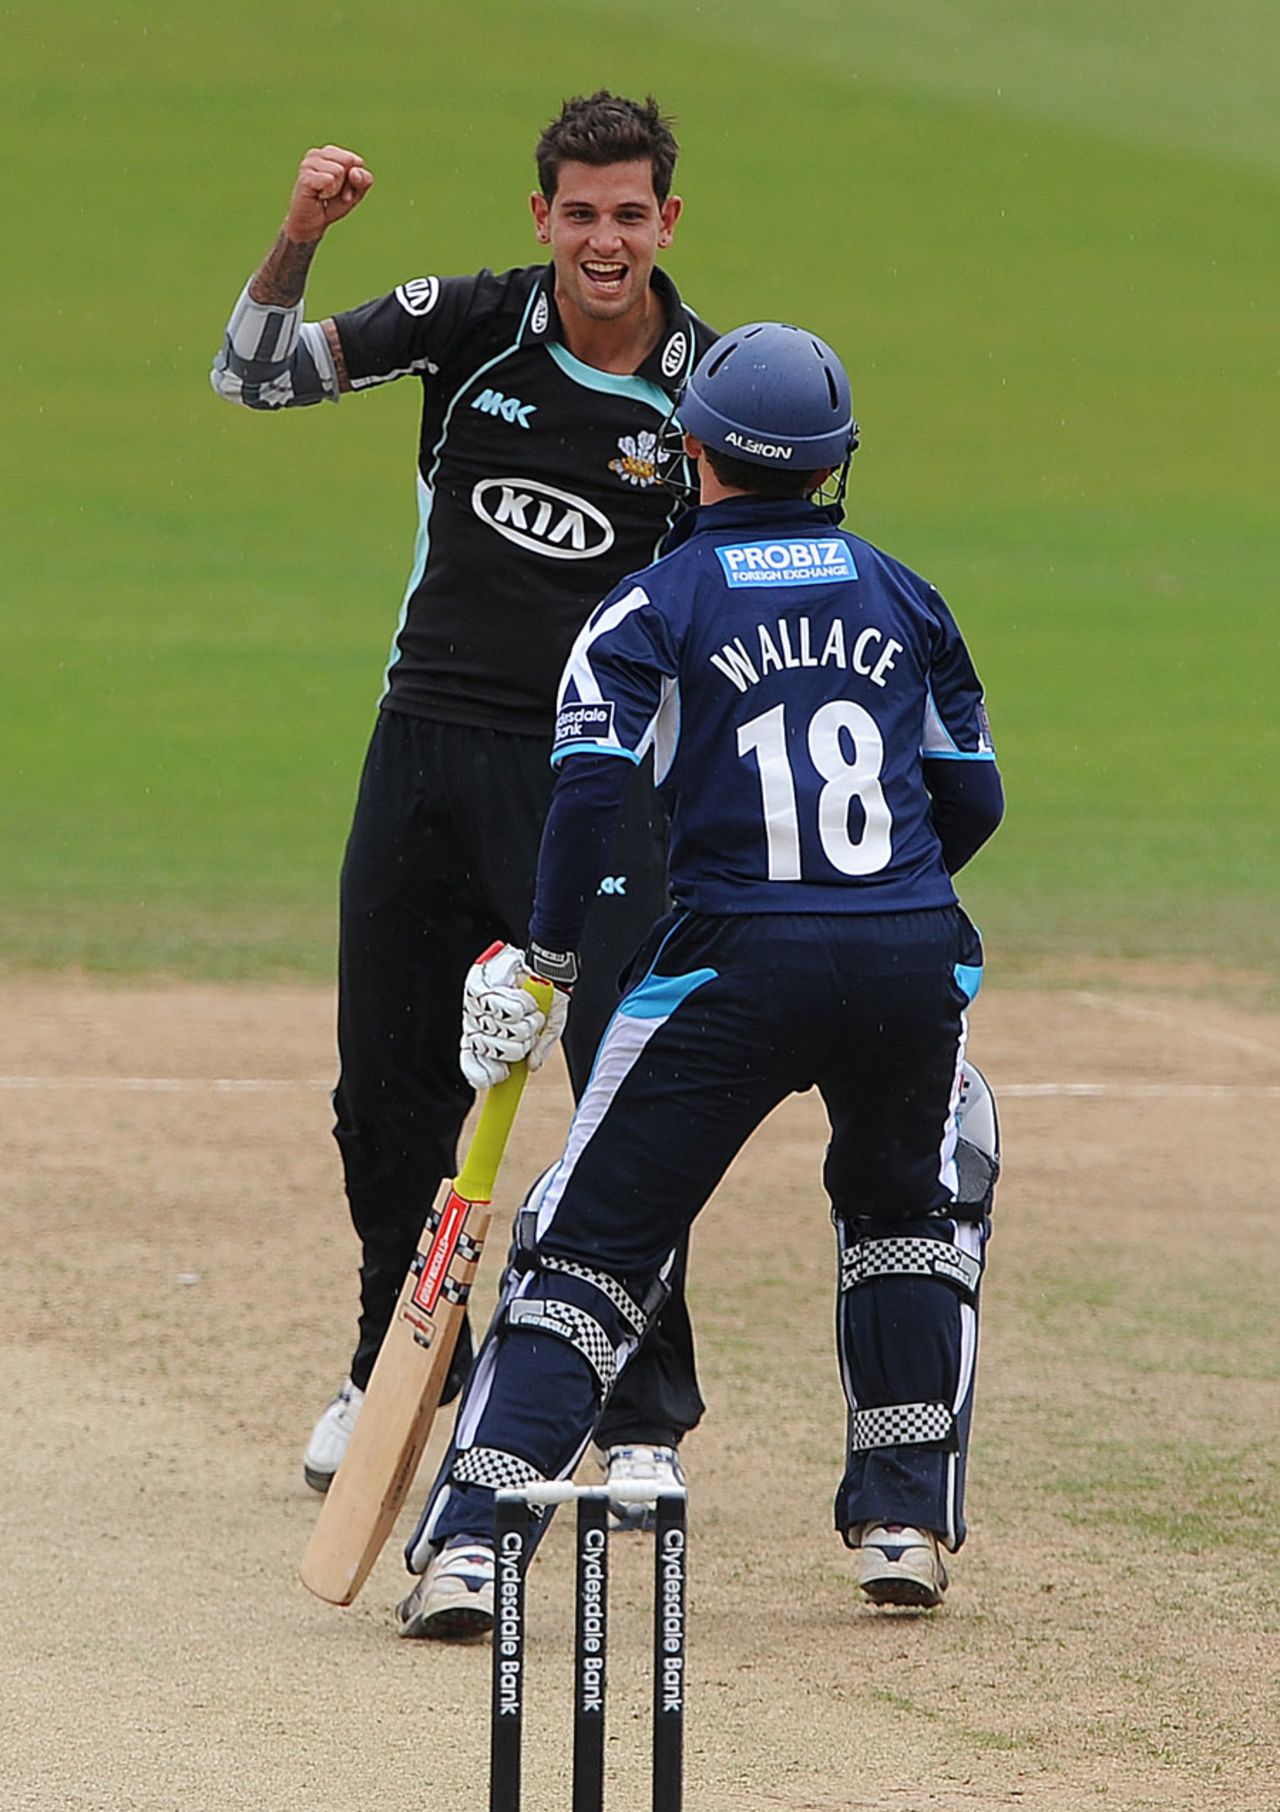 Jade Dernbach celebrates taking  the wicket of Craig Wallace, Surrey v Scotland, Clydesdale Bank 40, Group B, The Oval, June 5, 2012